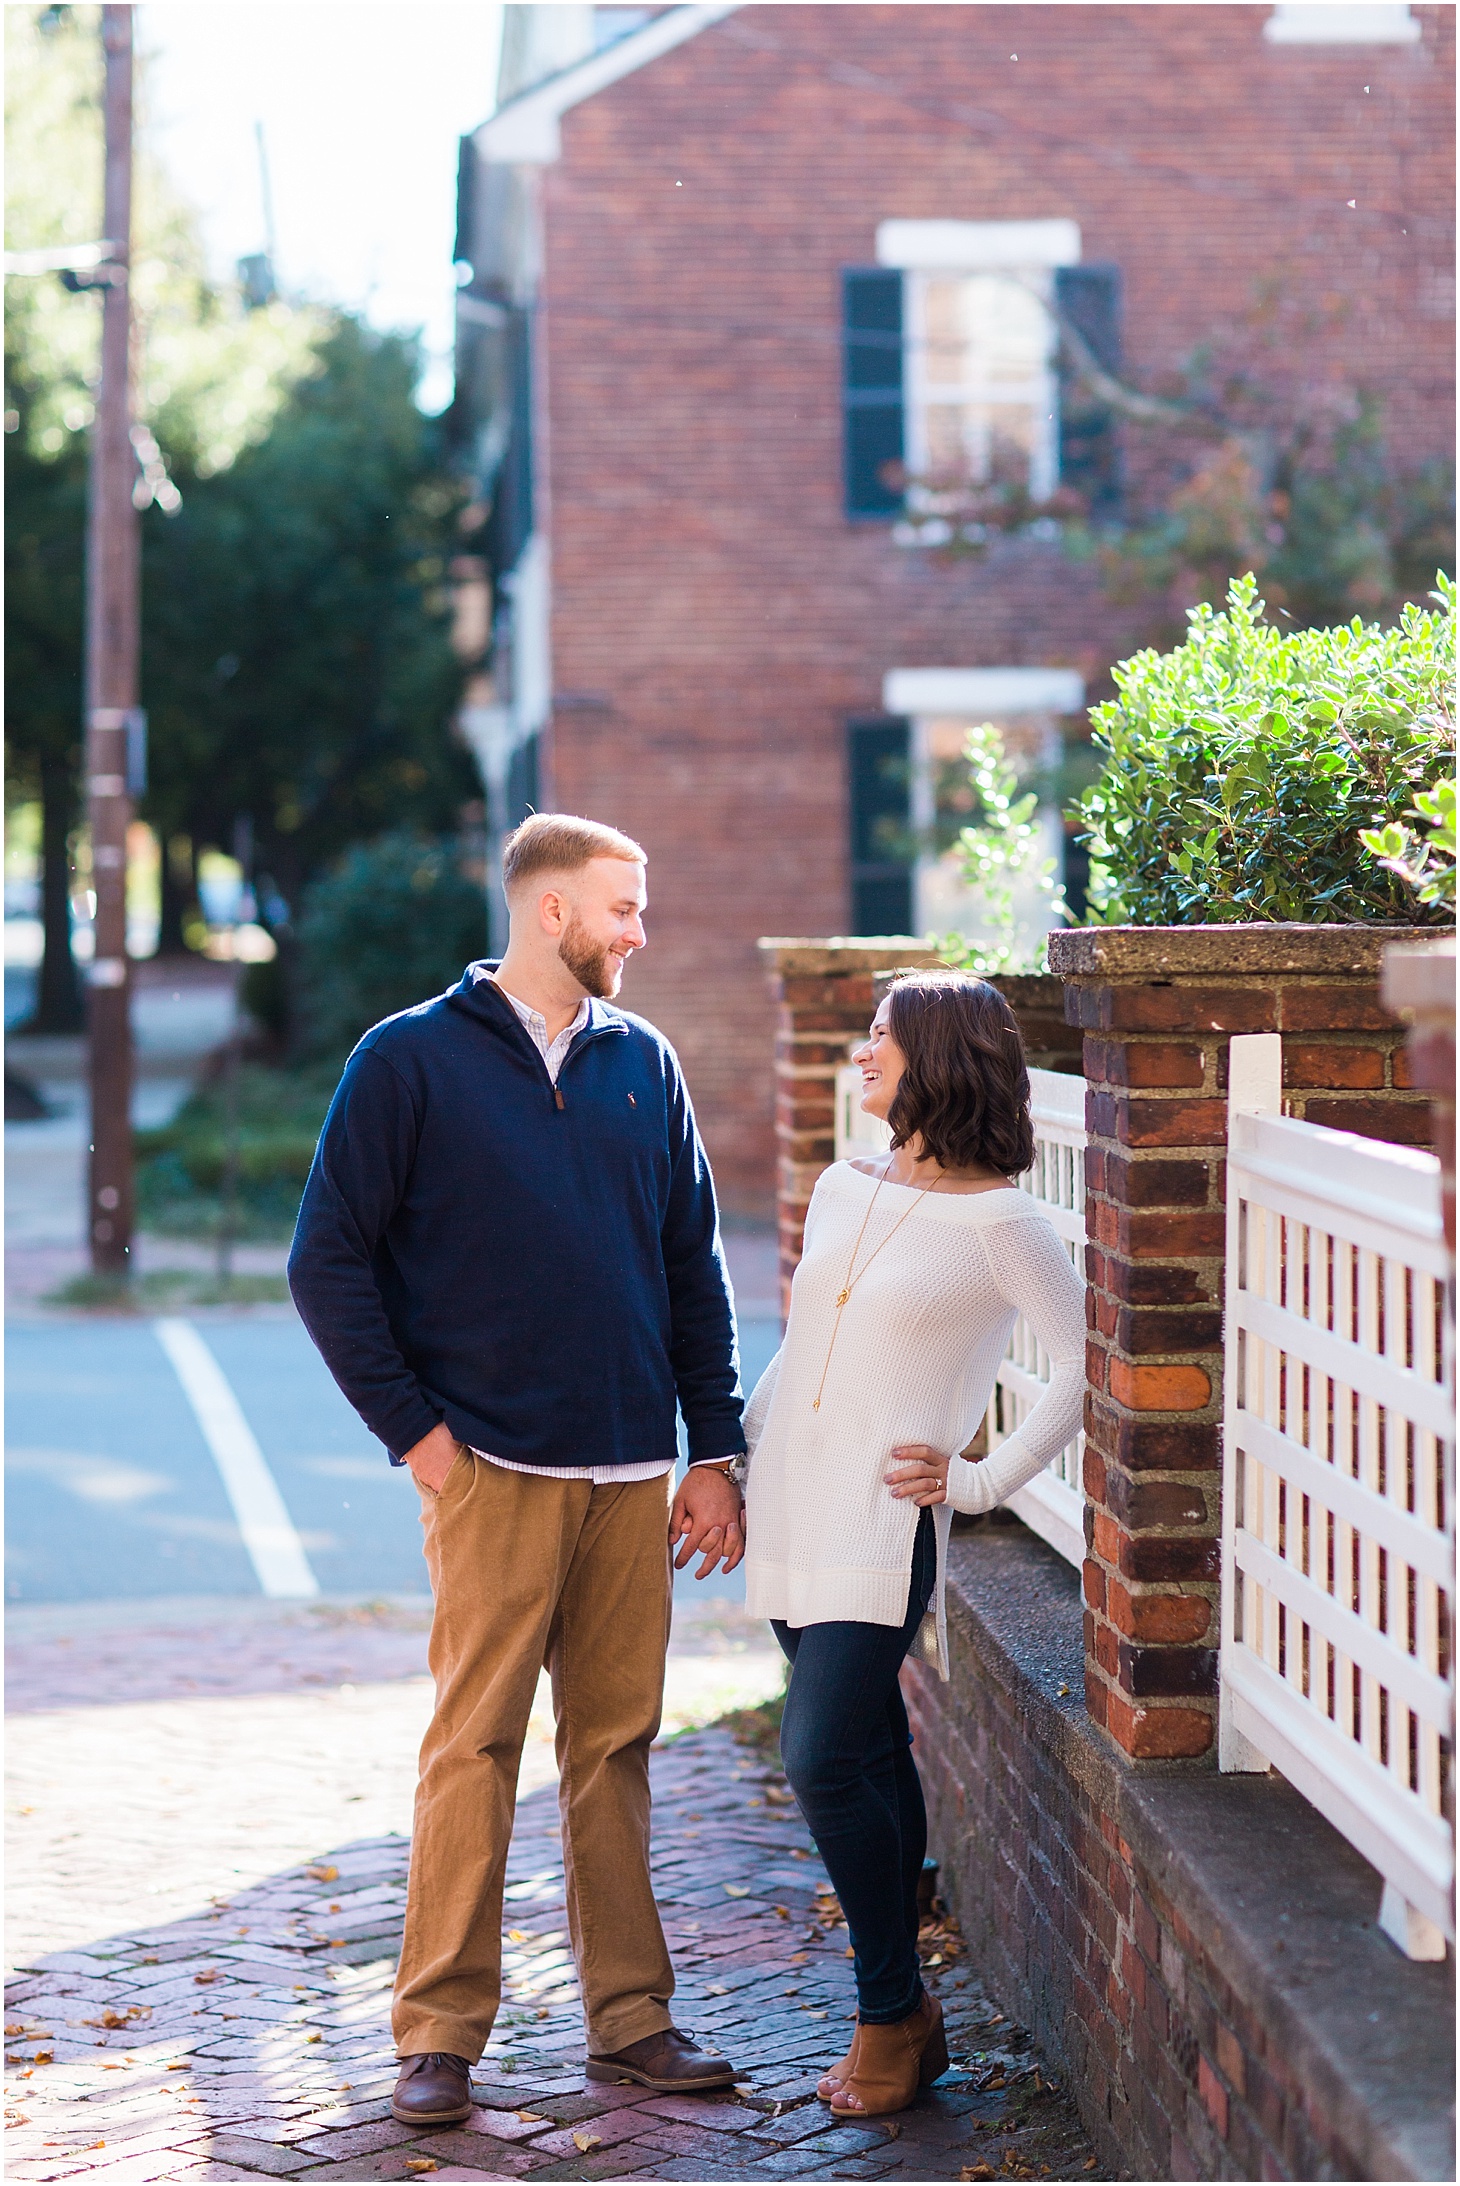 Engagement Portraits in Old Town Alexandria | Sunrise Engagement Session in Washington, DC | Sarah Bradshaw Photography